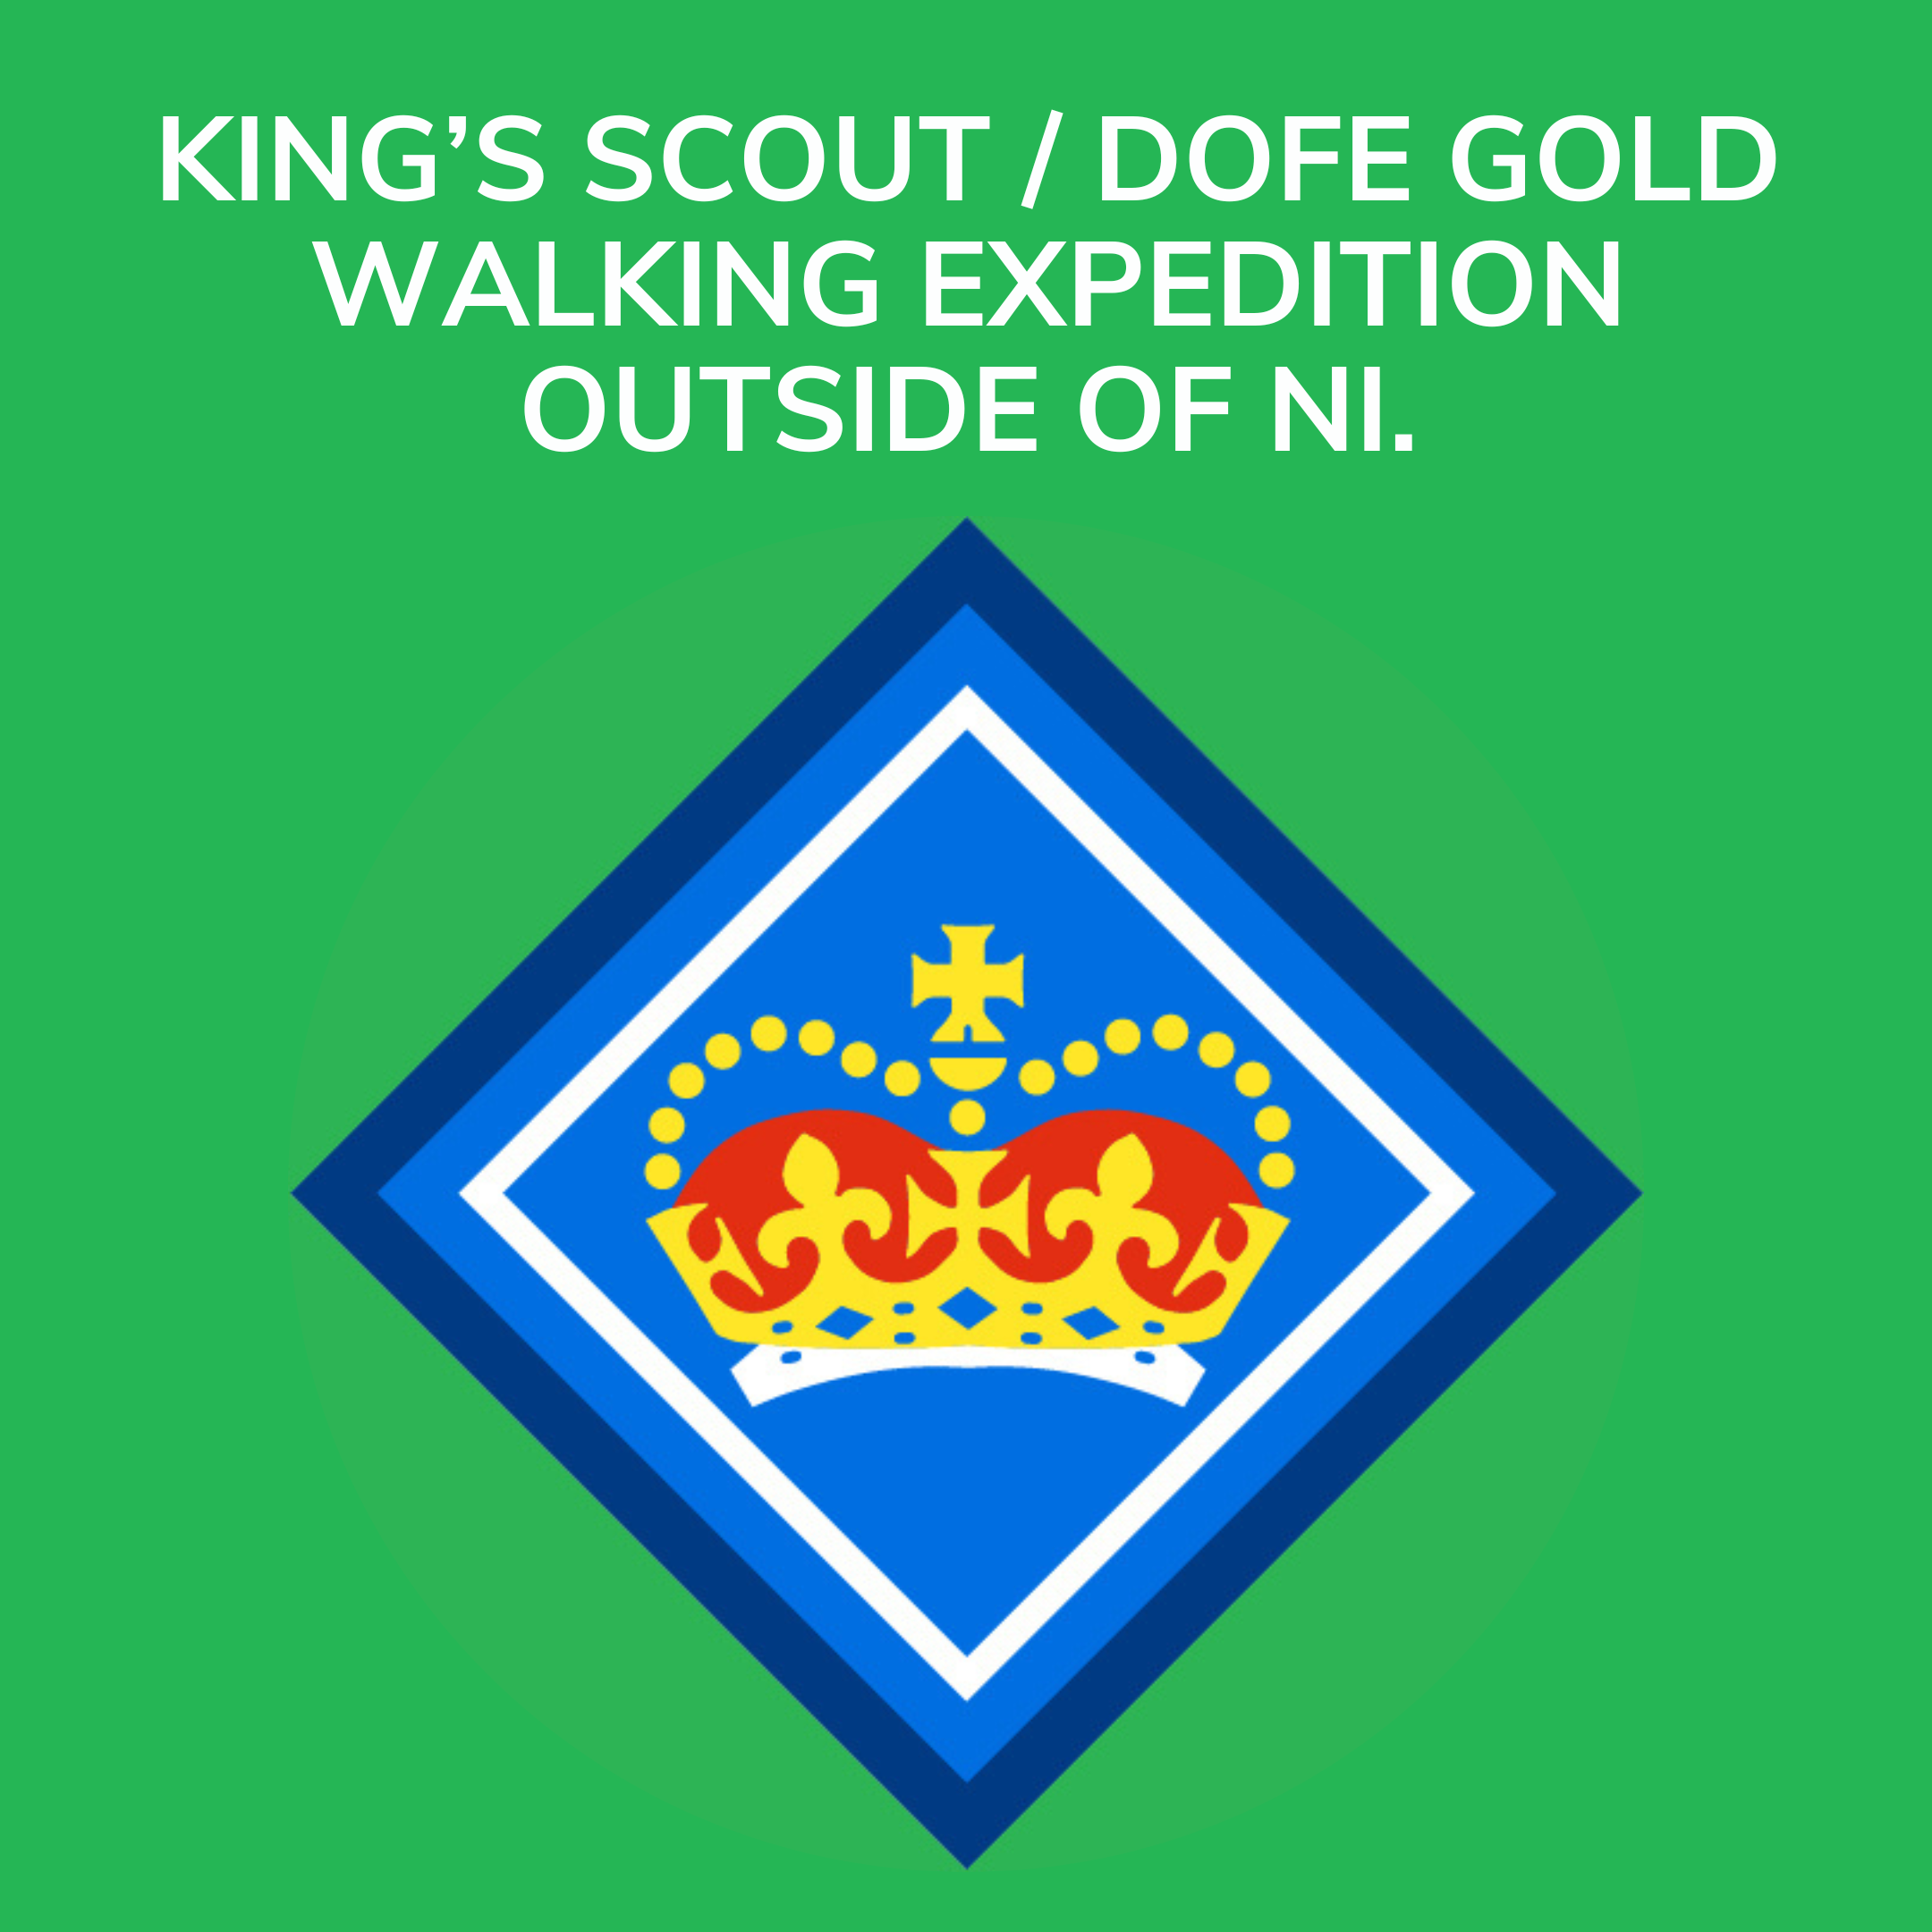 King’s Scout / DofE Gold Walking Expedition outside of NI